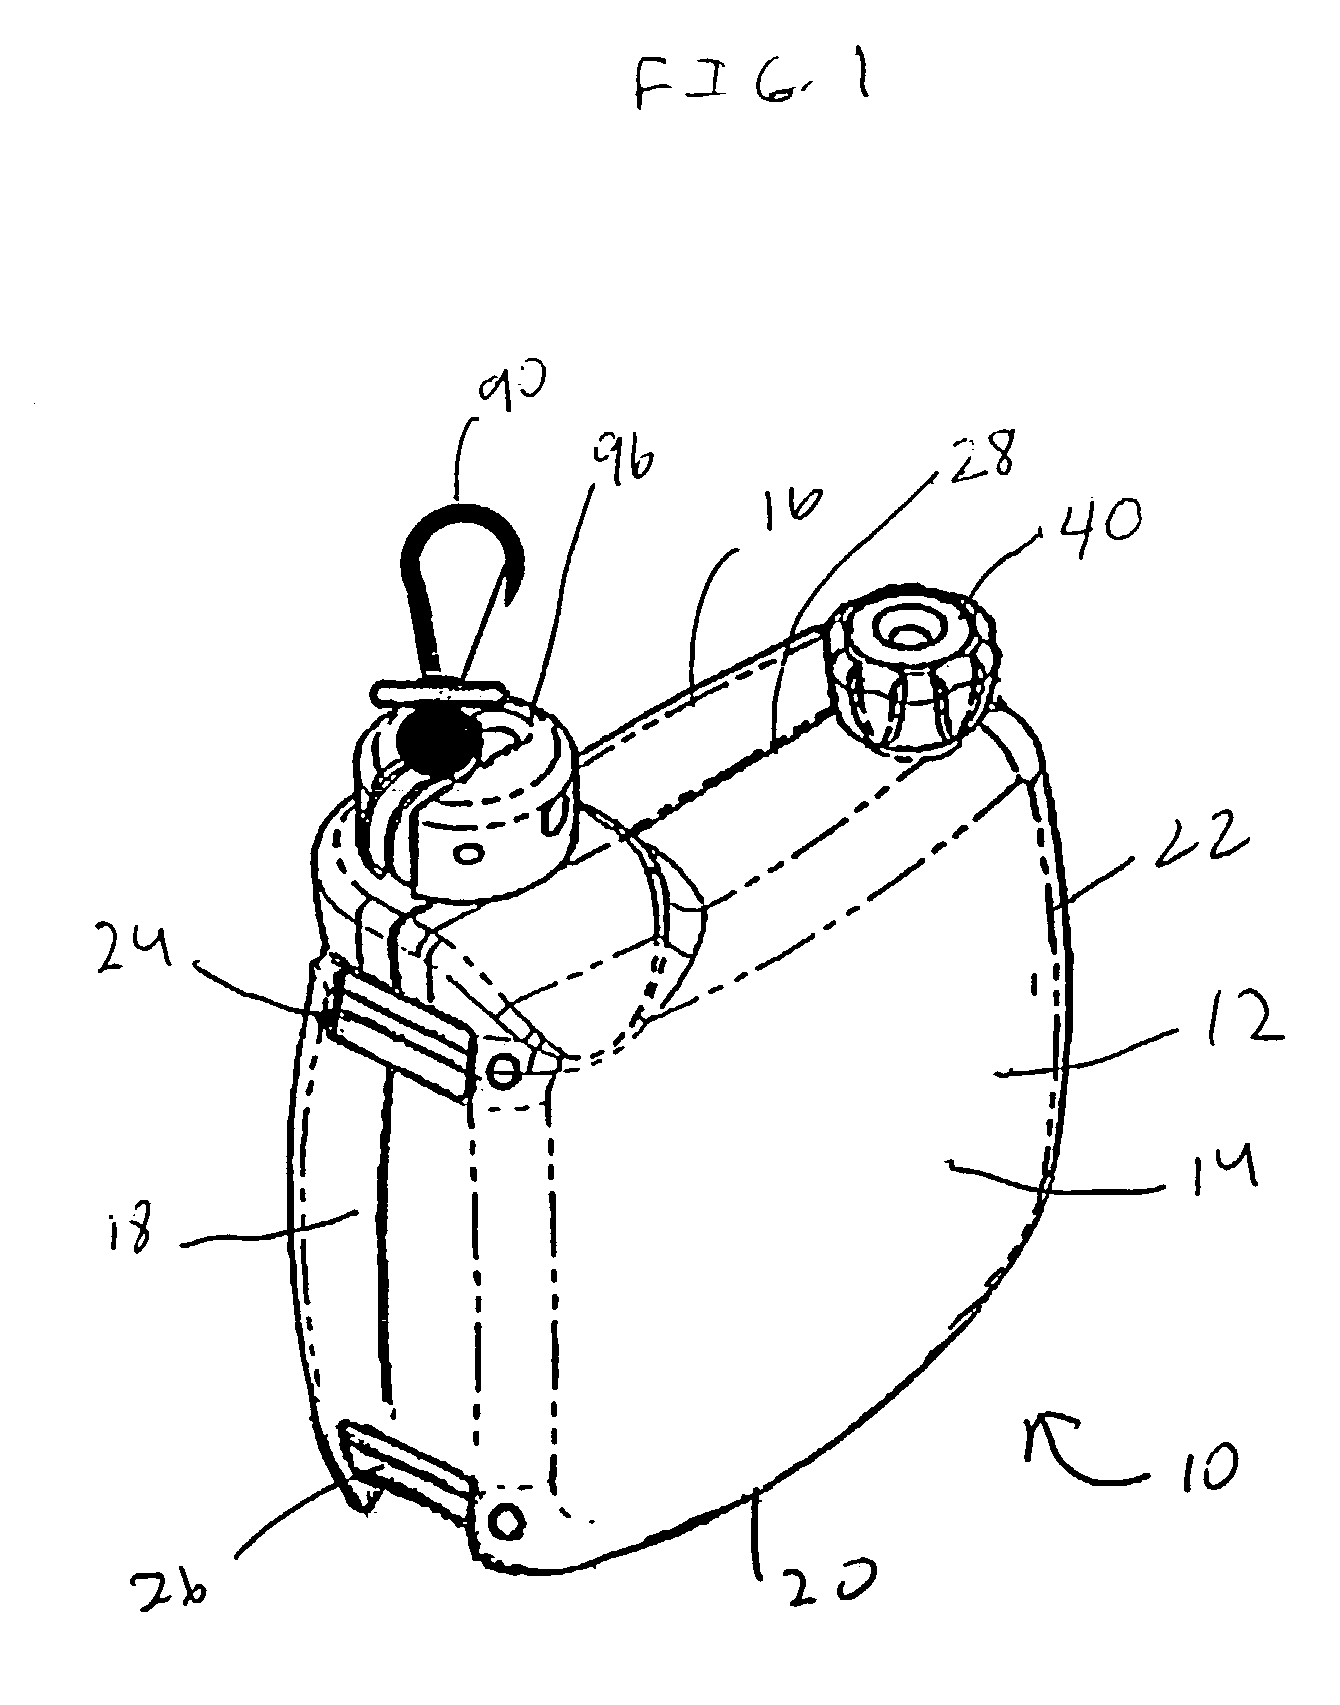 Portable handheld exercise apparatus which can be attached to a multiplicity of body parts